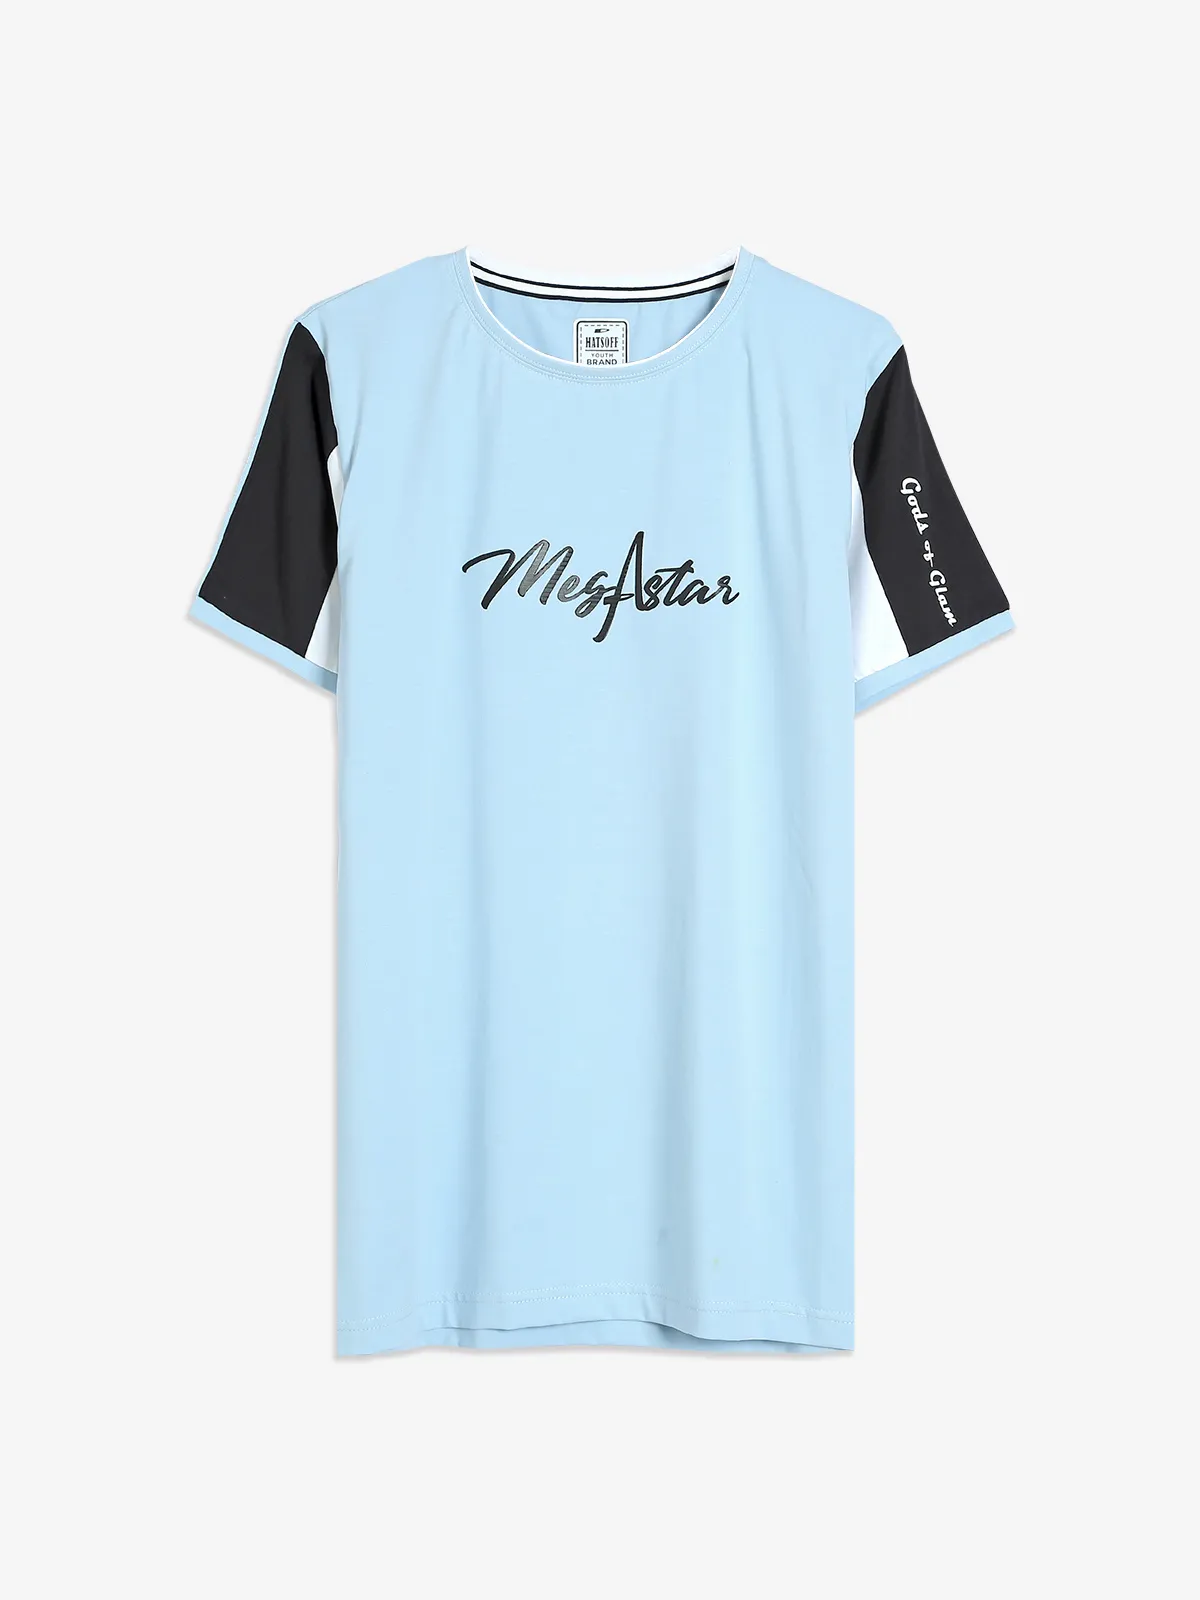 Hats Off sky blue cotton printed t shirt